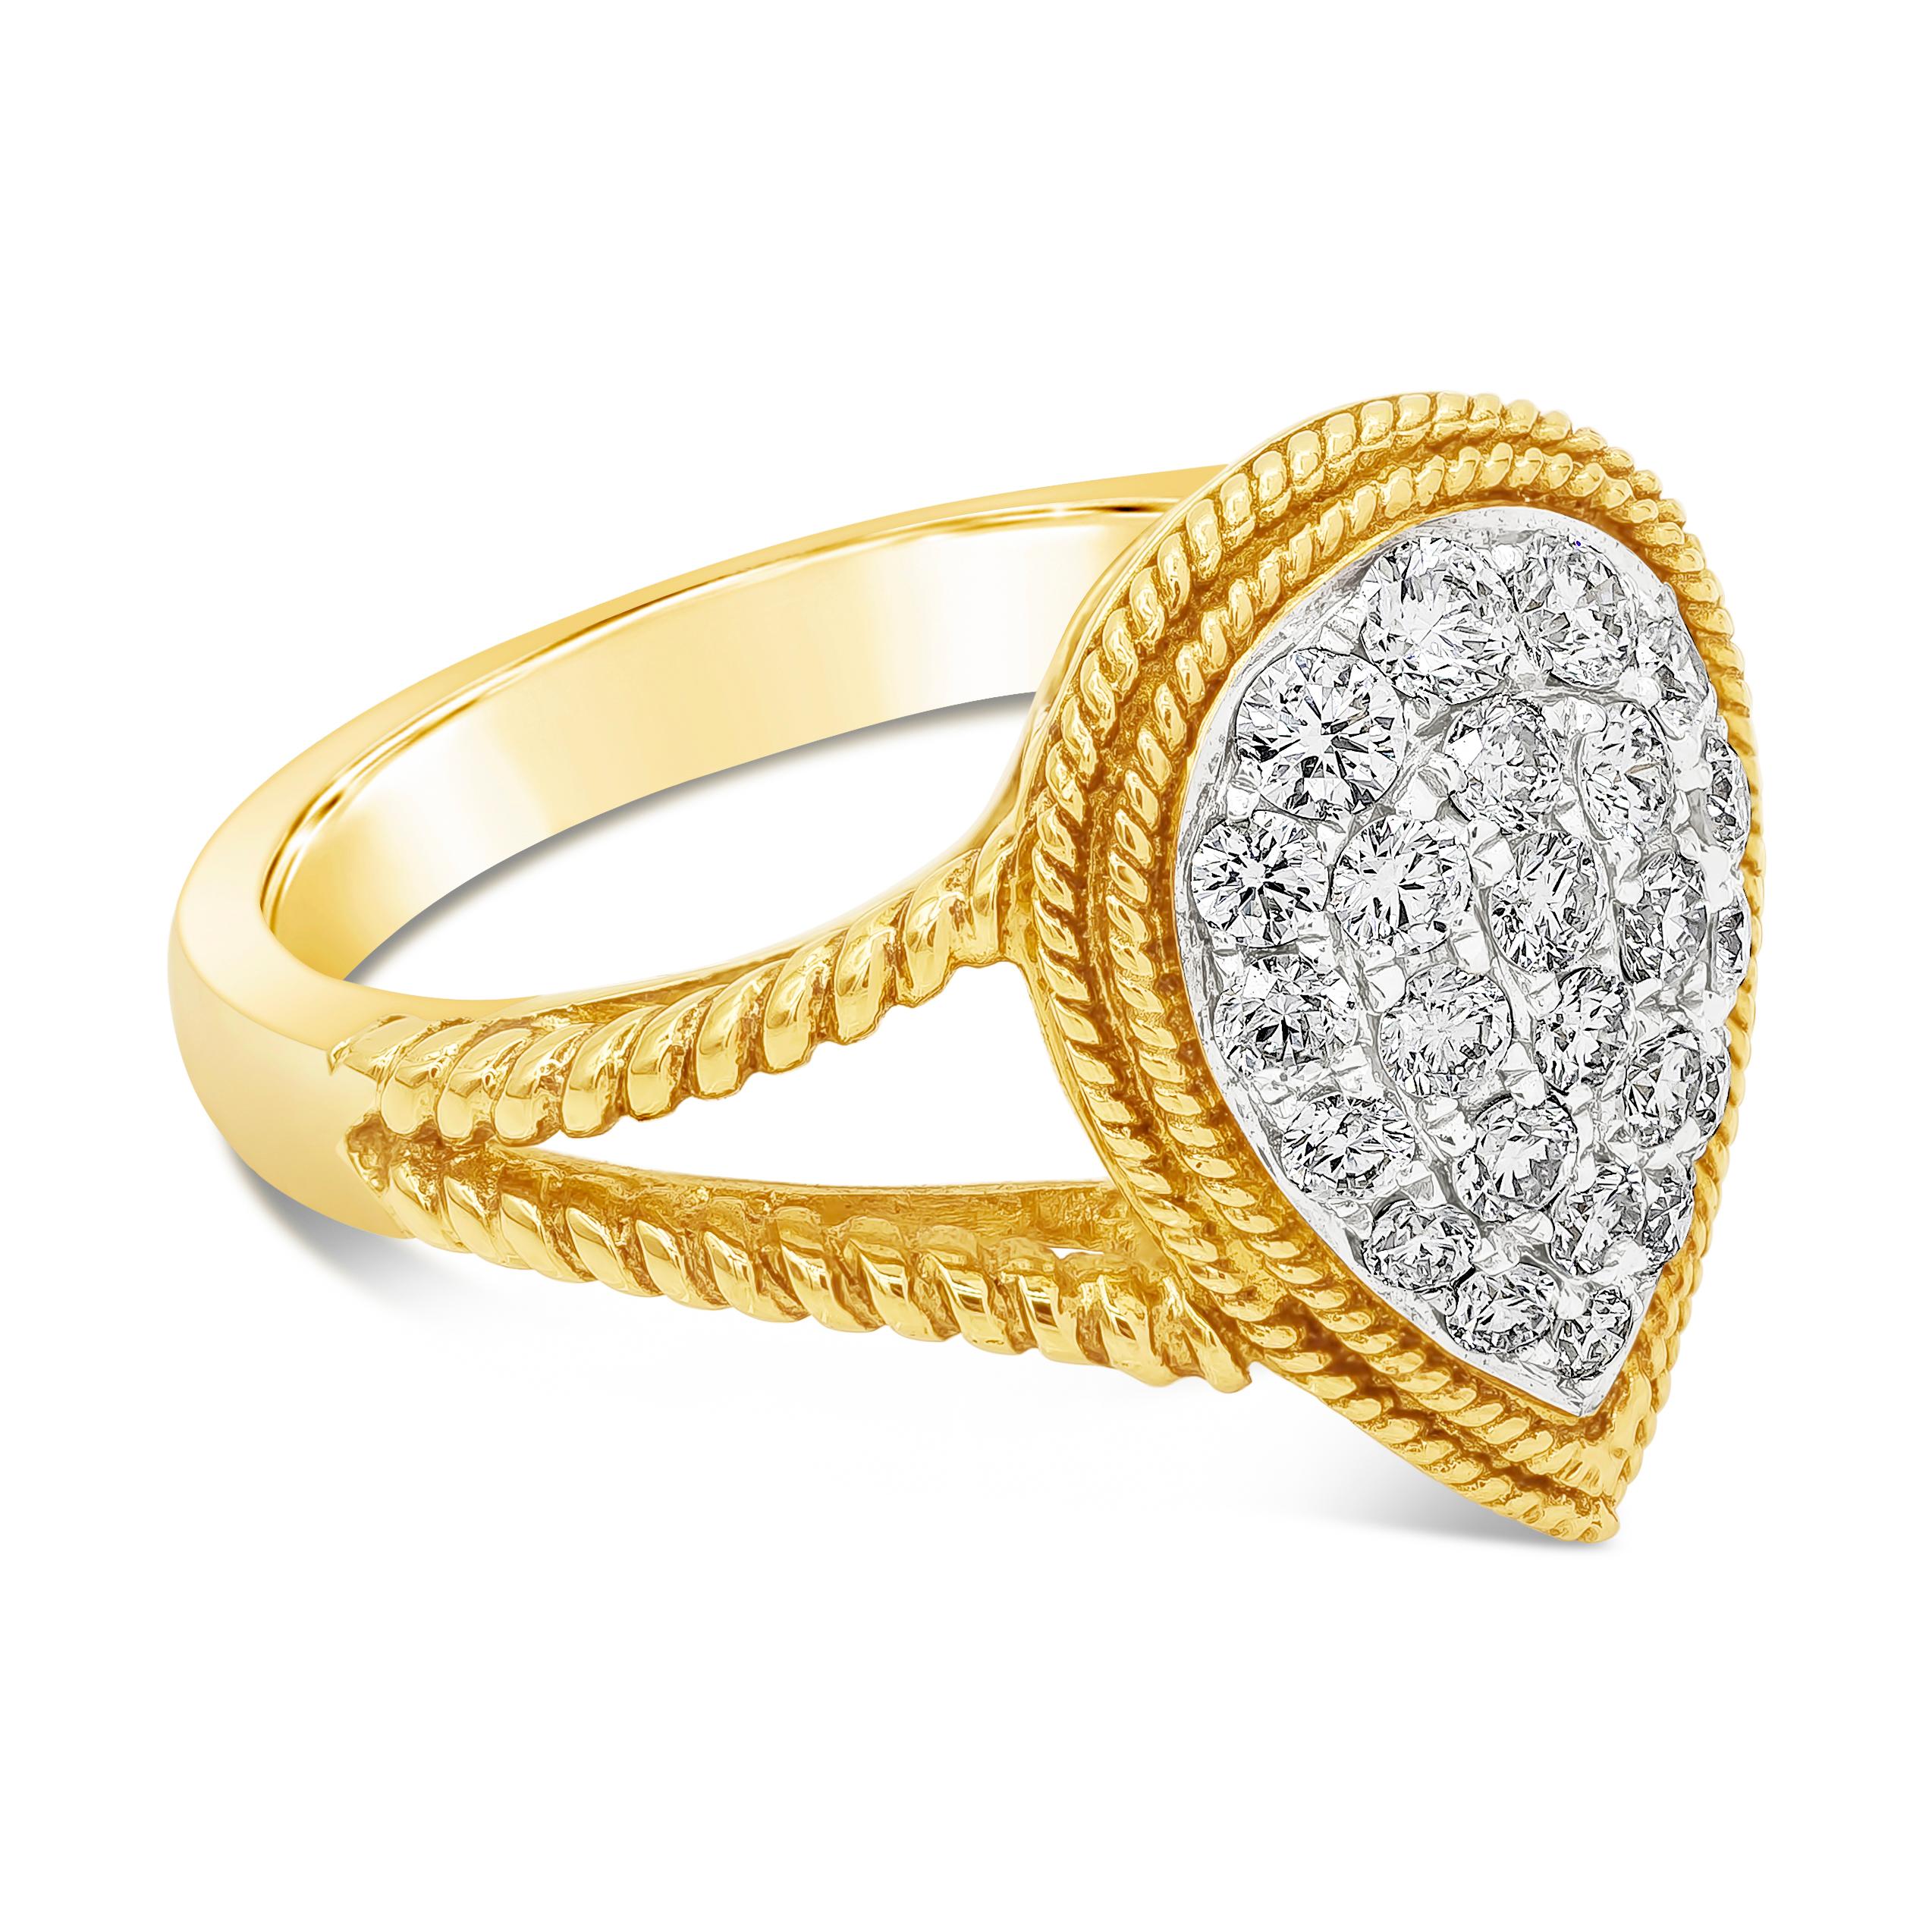 A timeless antique look fashion ring showcasing a cluster of round brilliant diamonds weighing 0.59 carats micro-pave set in pear shape bezel with rope edges design. Set in a split shank, Finished with rope design, made in 18K Yellow Gold, Size 6.25